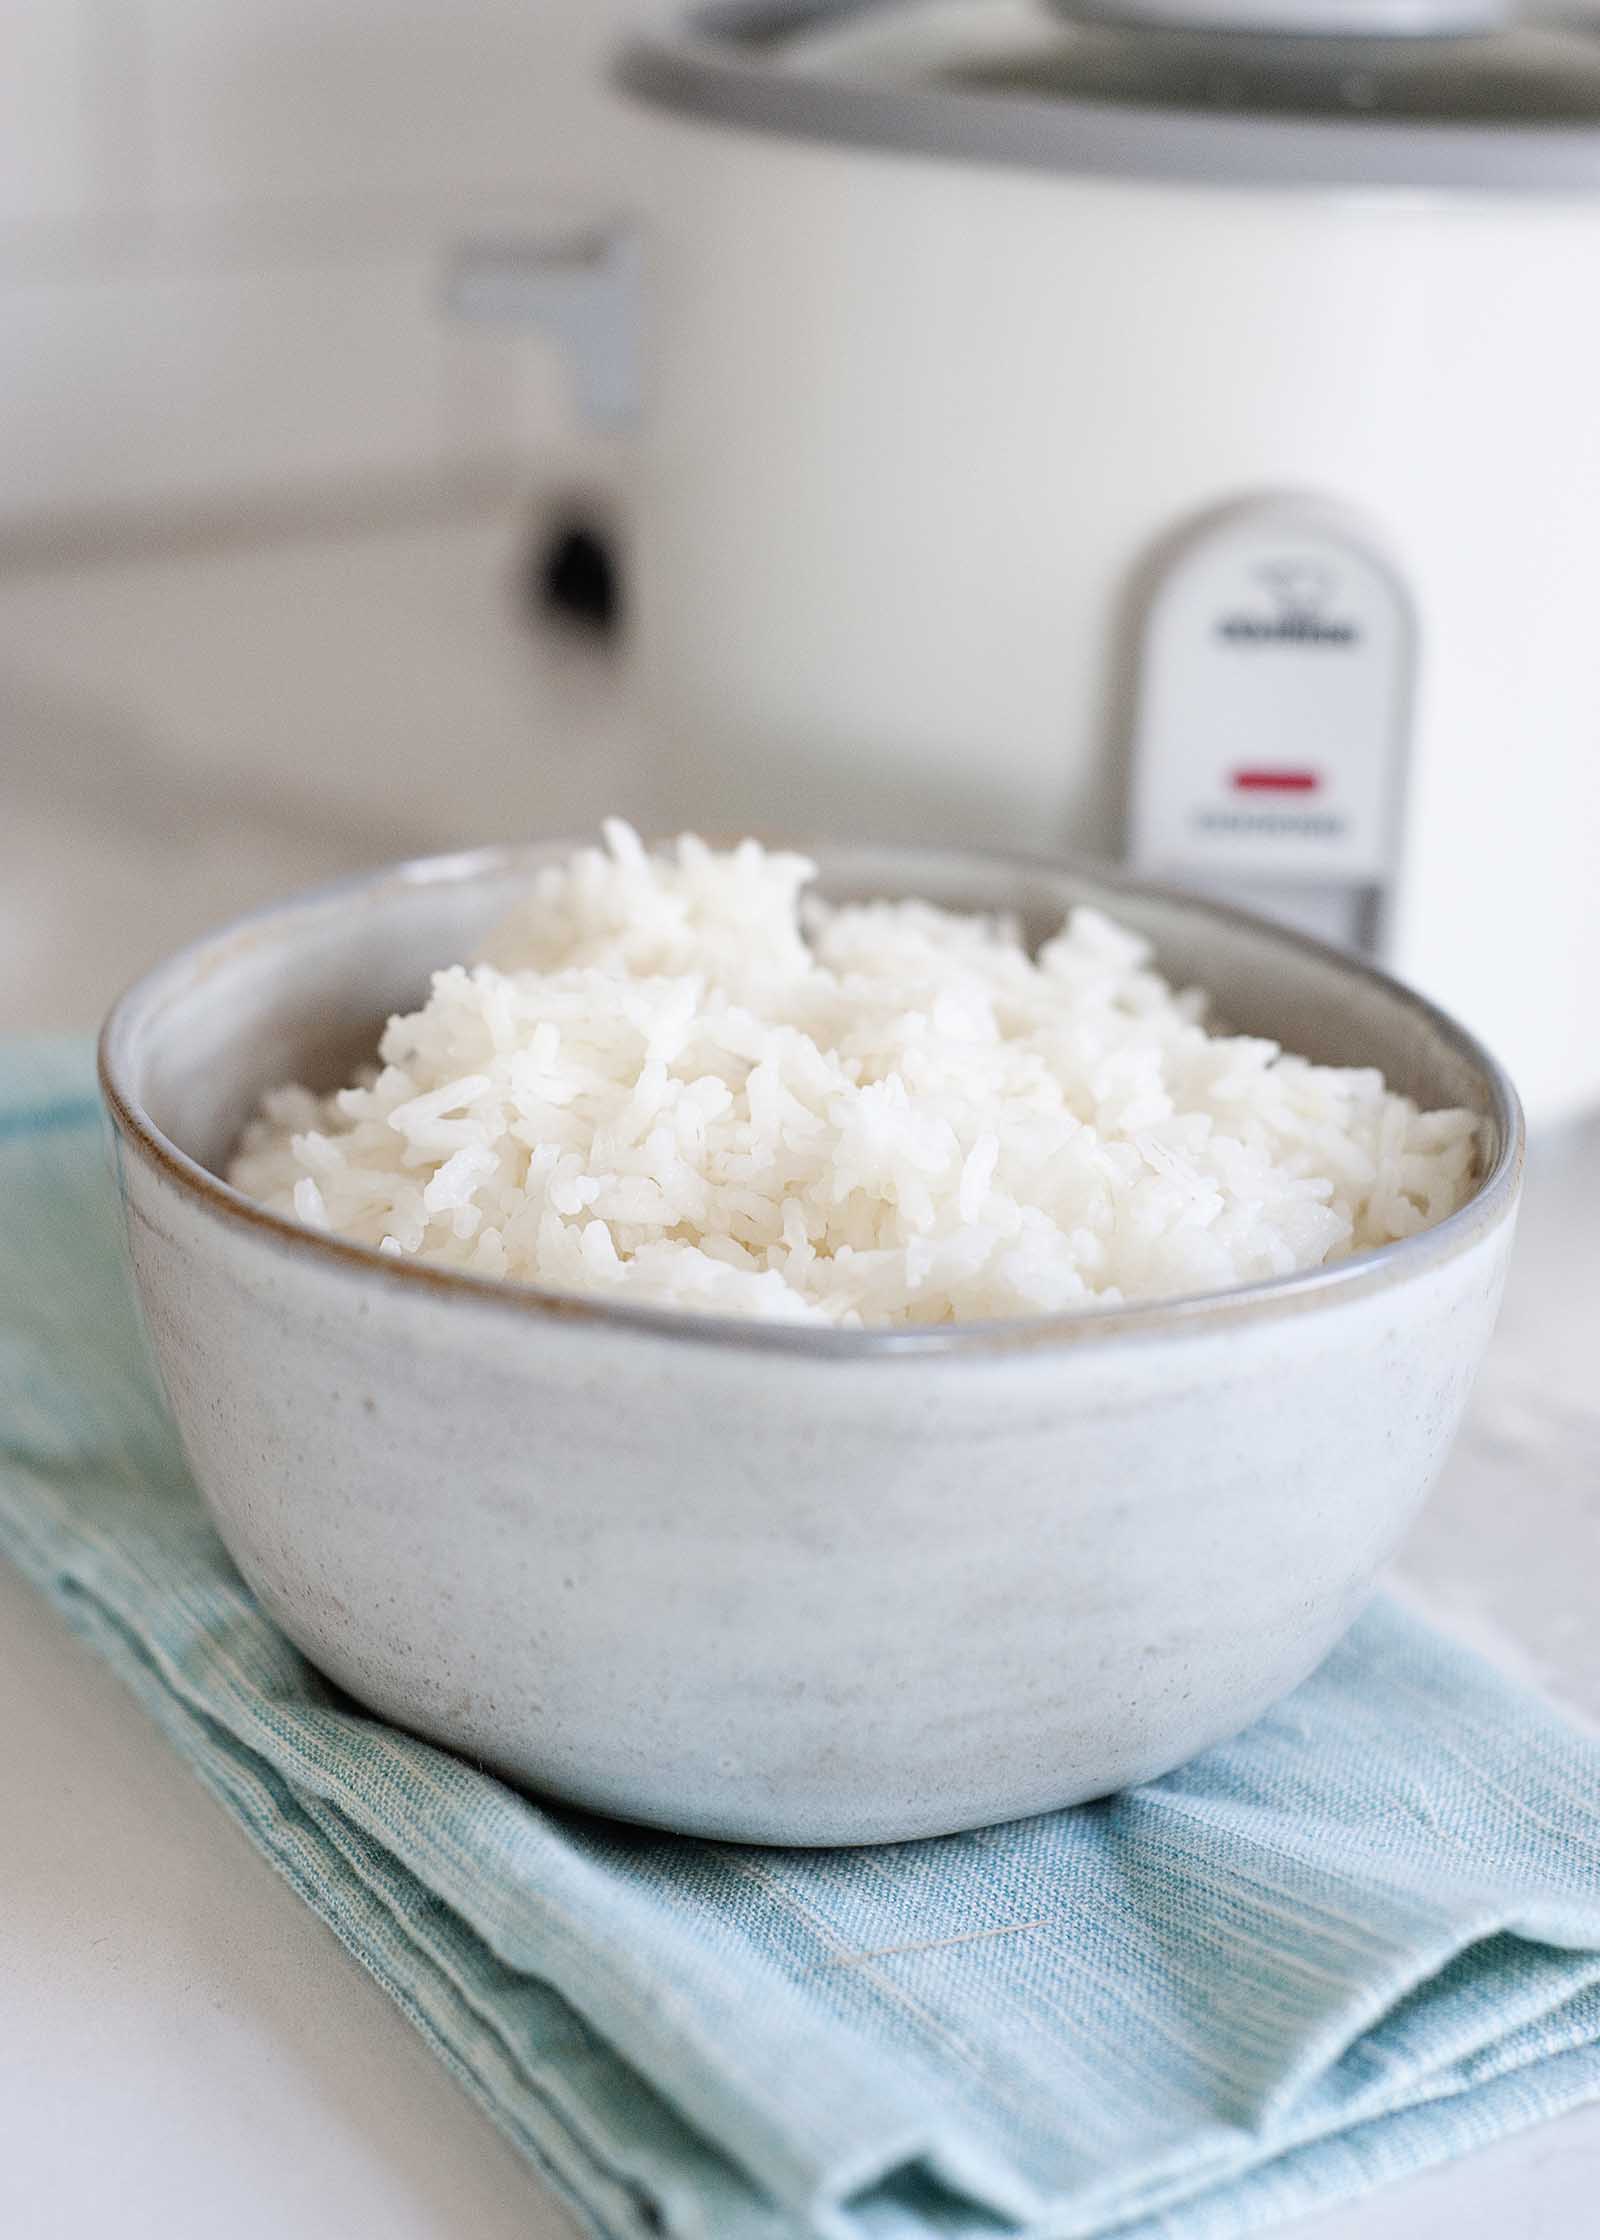 Vertical image of a ceramic bowl filled with white rice on a white counter. A teal dish towel is under the bowl of rice and a white rice cooker is behind the bowl of rice.